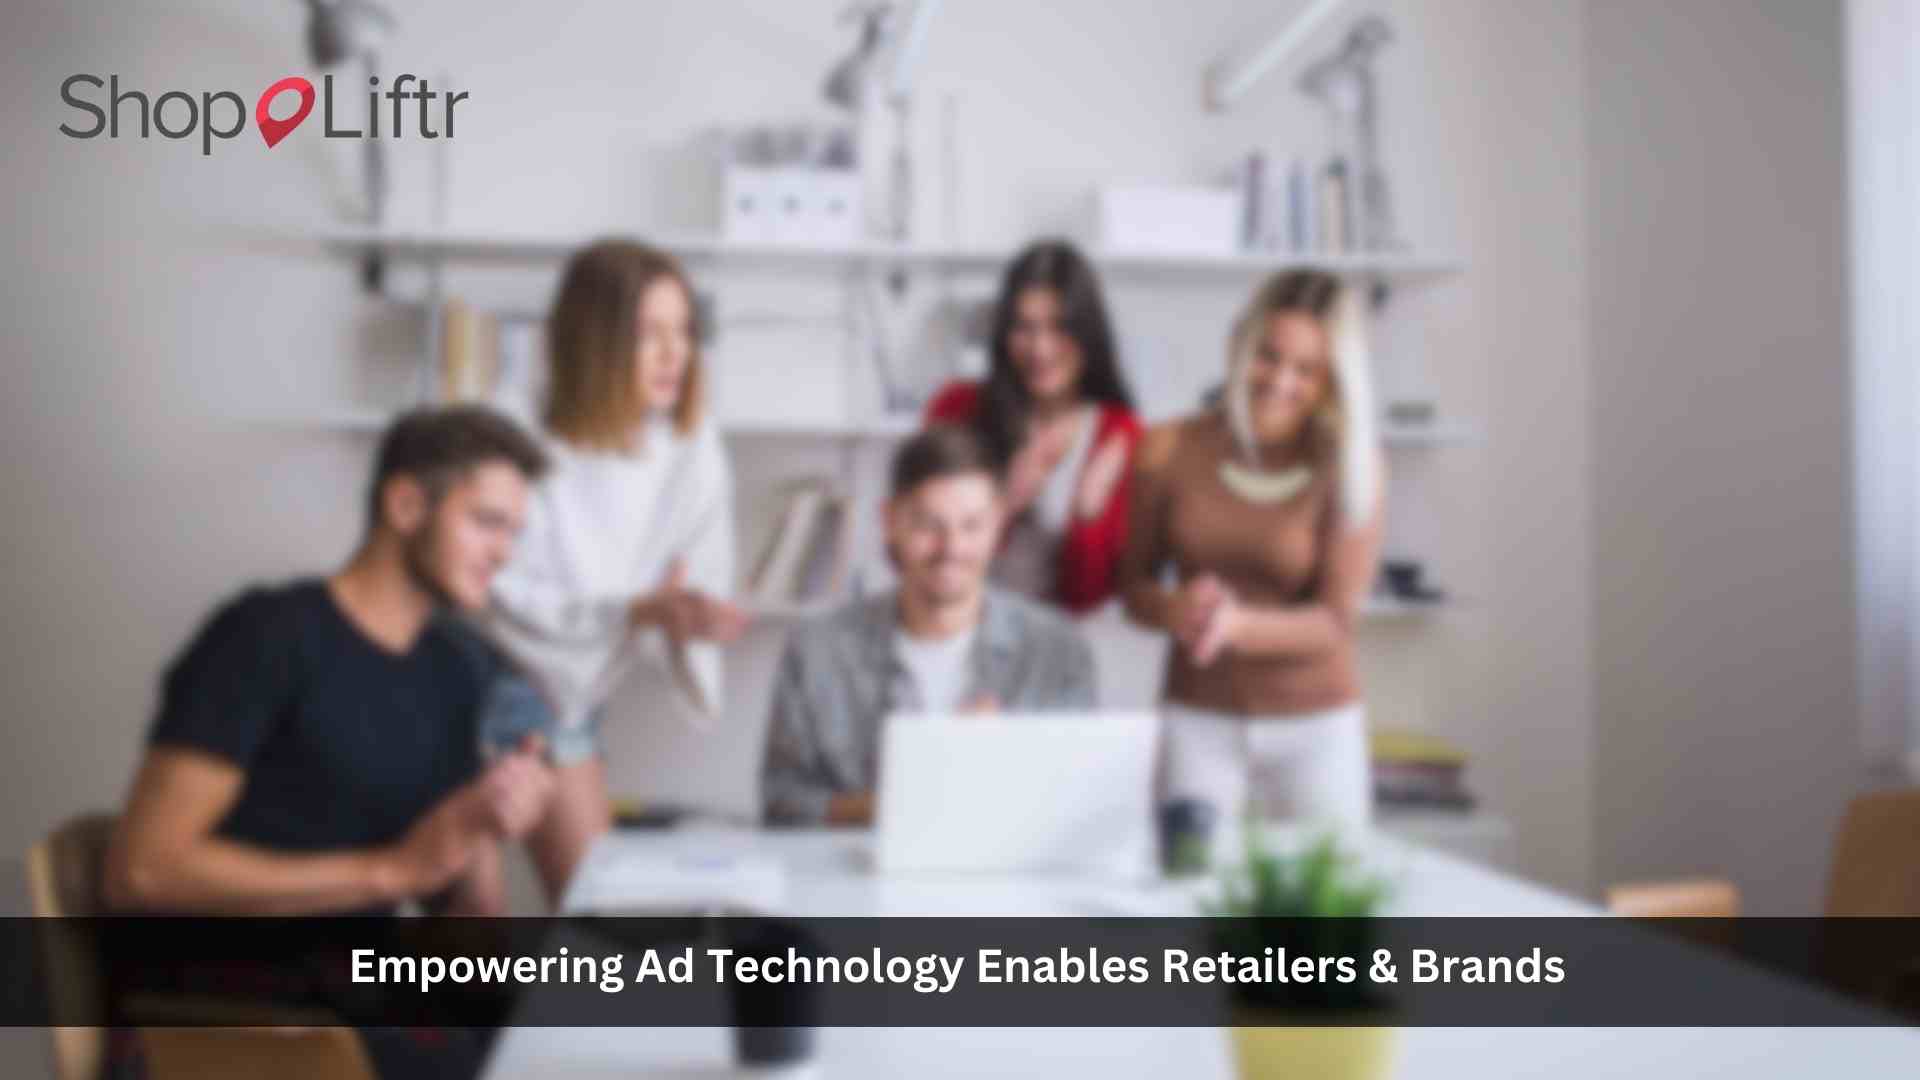 ShopLiftr's Empowering Ad Technology Enables Retailers & Brands to Deliver Real-Time Promotions to Consumers